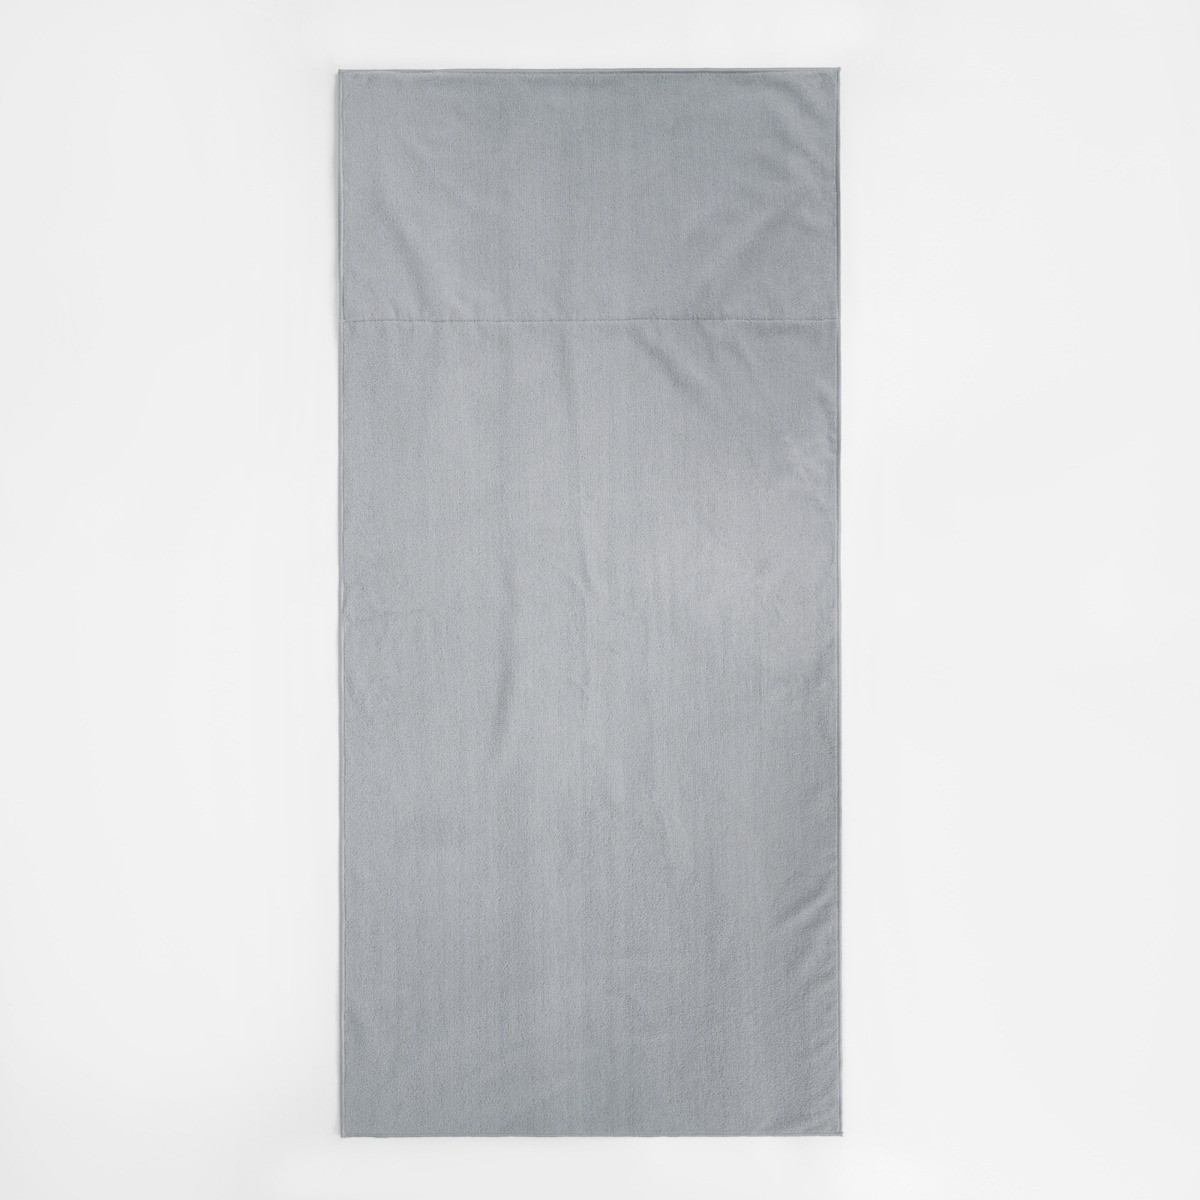 Brentfords Beach Towel With Removable Pillow - Grey>